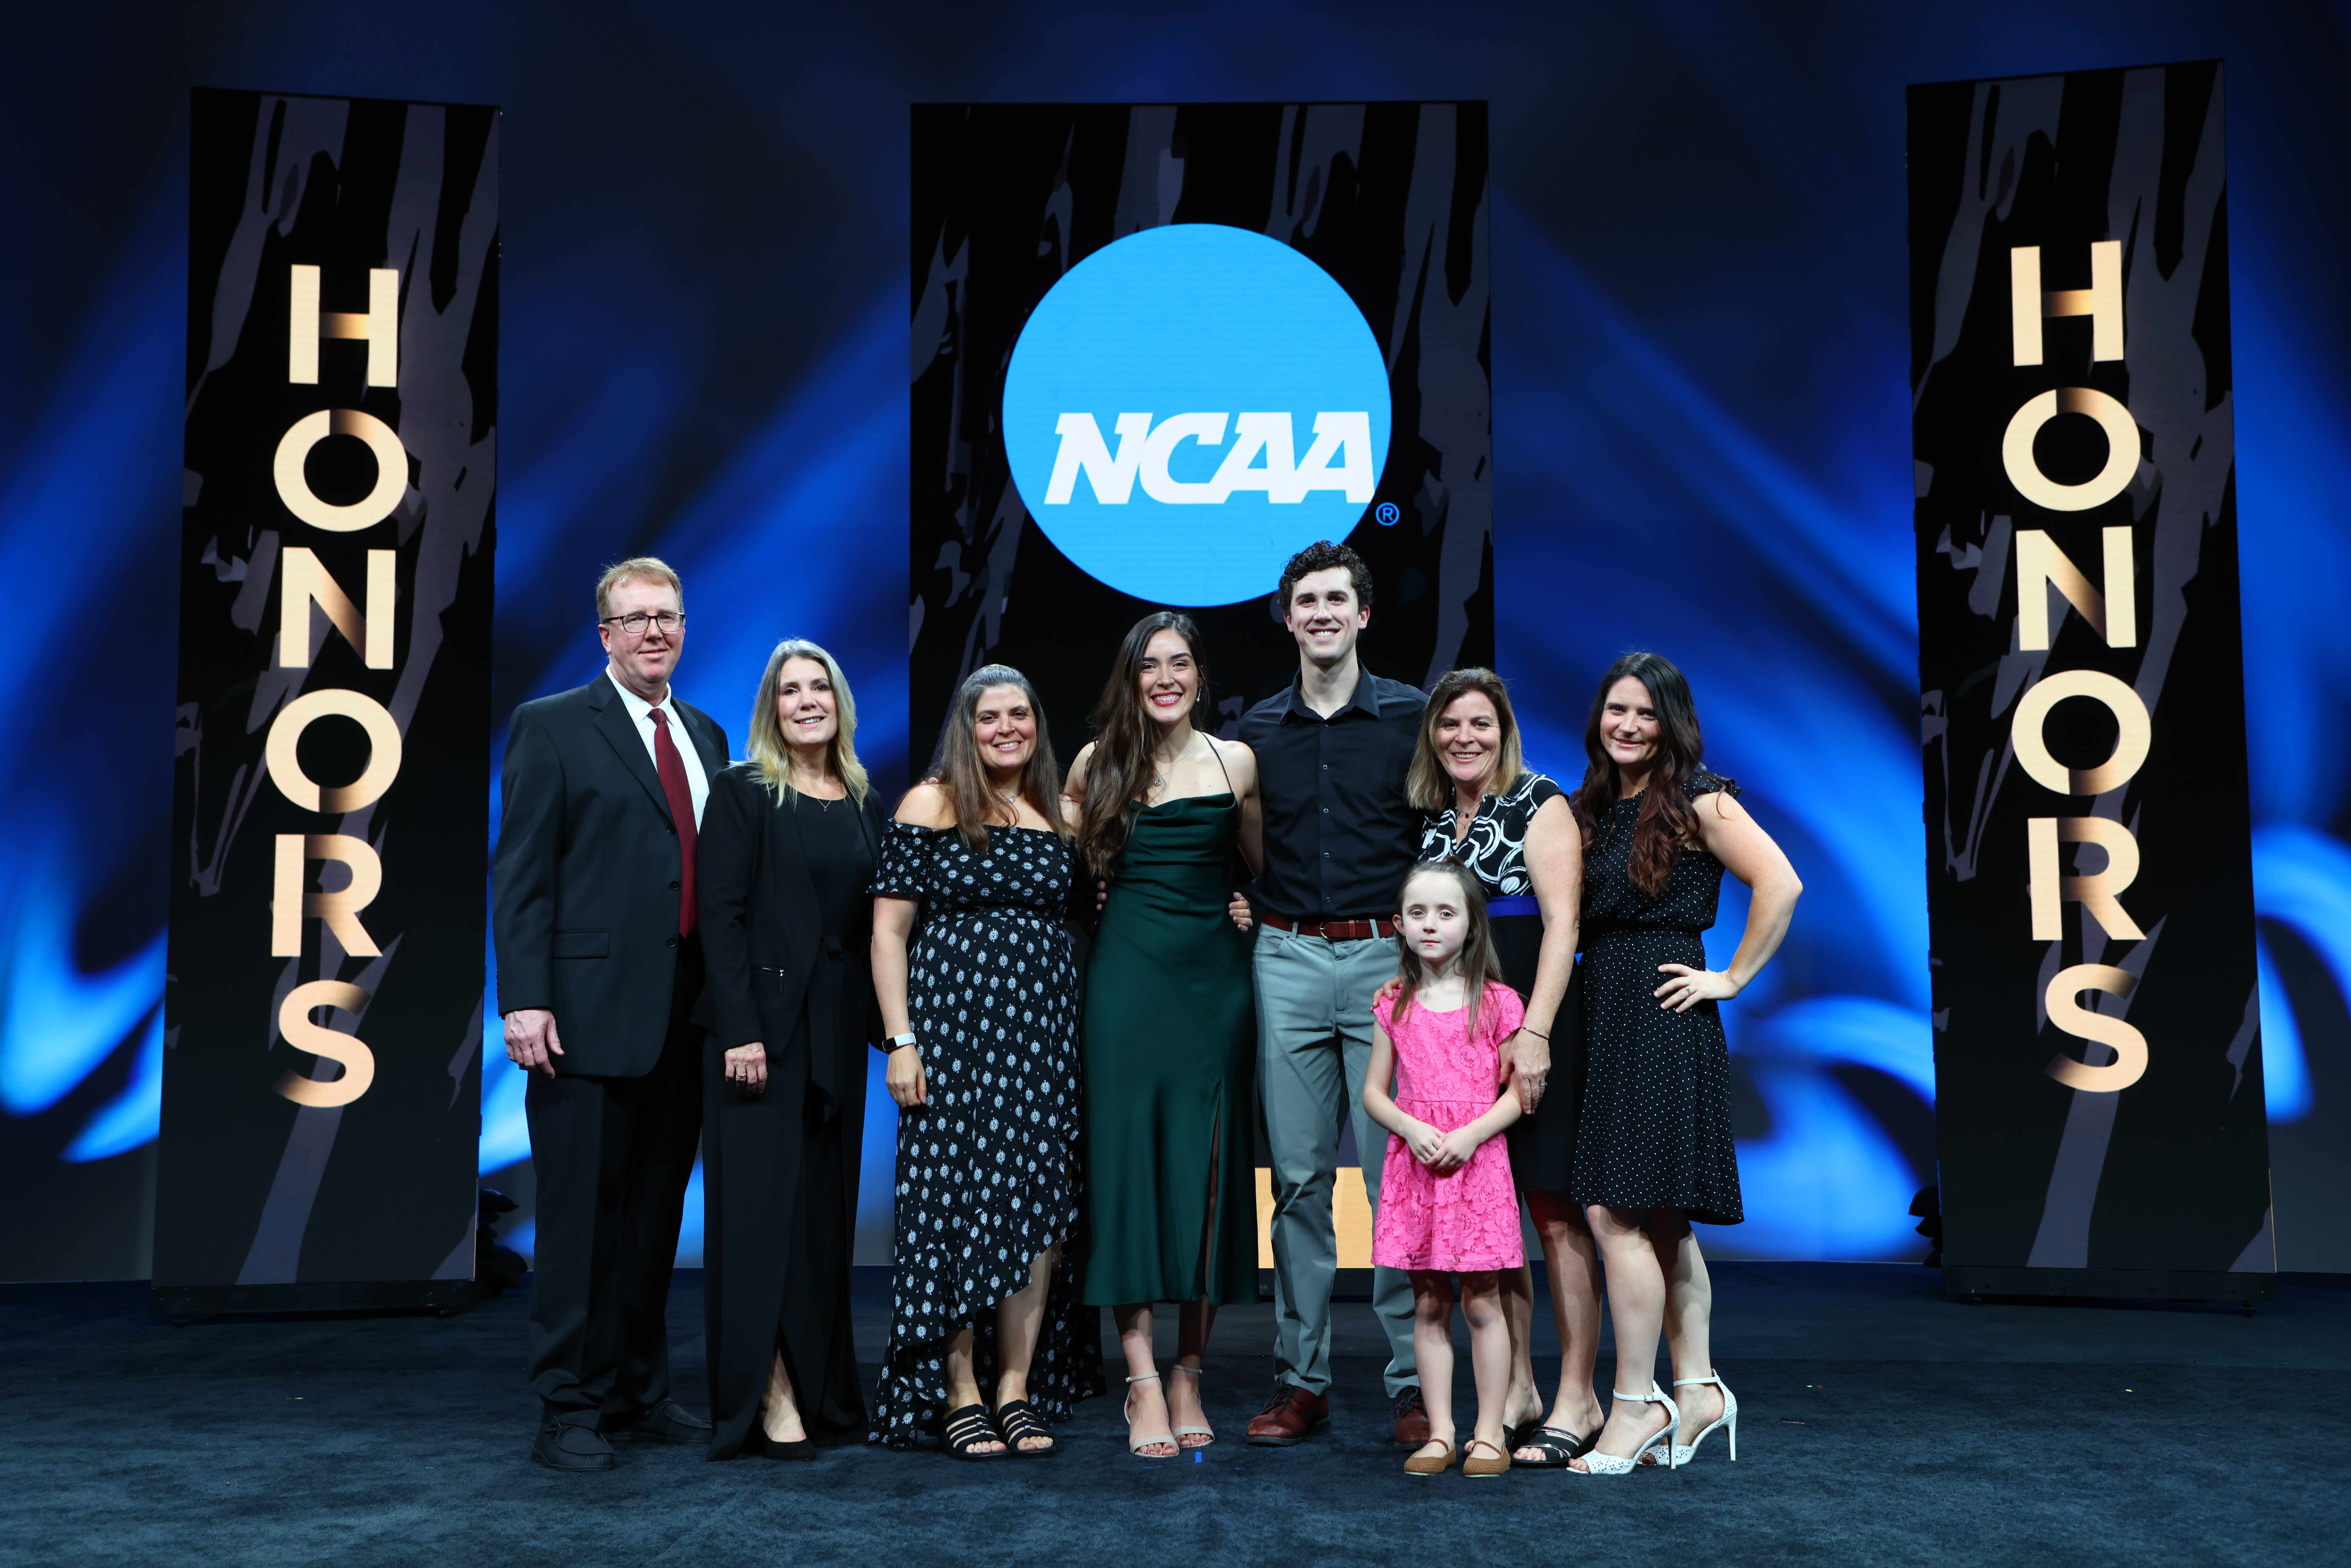 Gracie, wearing a fancy green dress, stands with family members on a stage at the NCAA Honors event. 